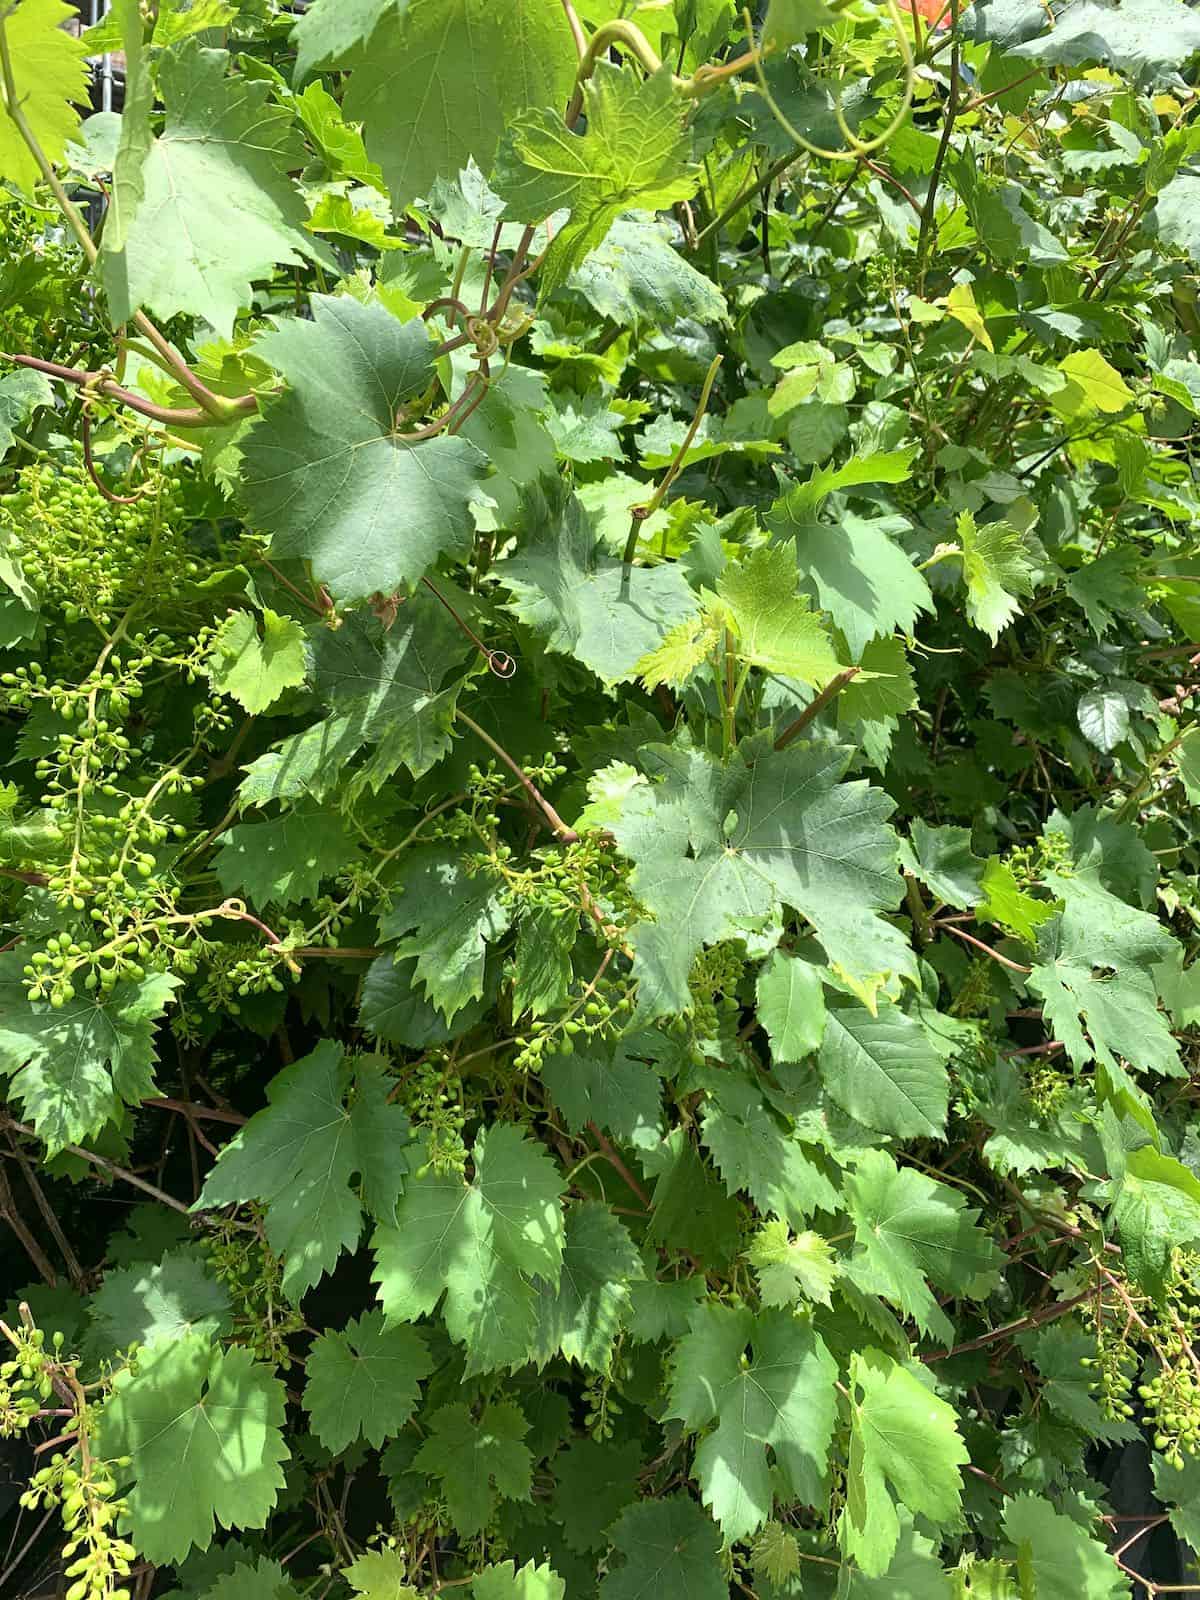 A grape vine with lots of leaves and grapes